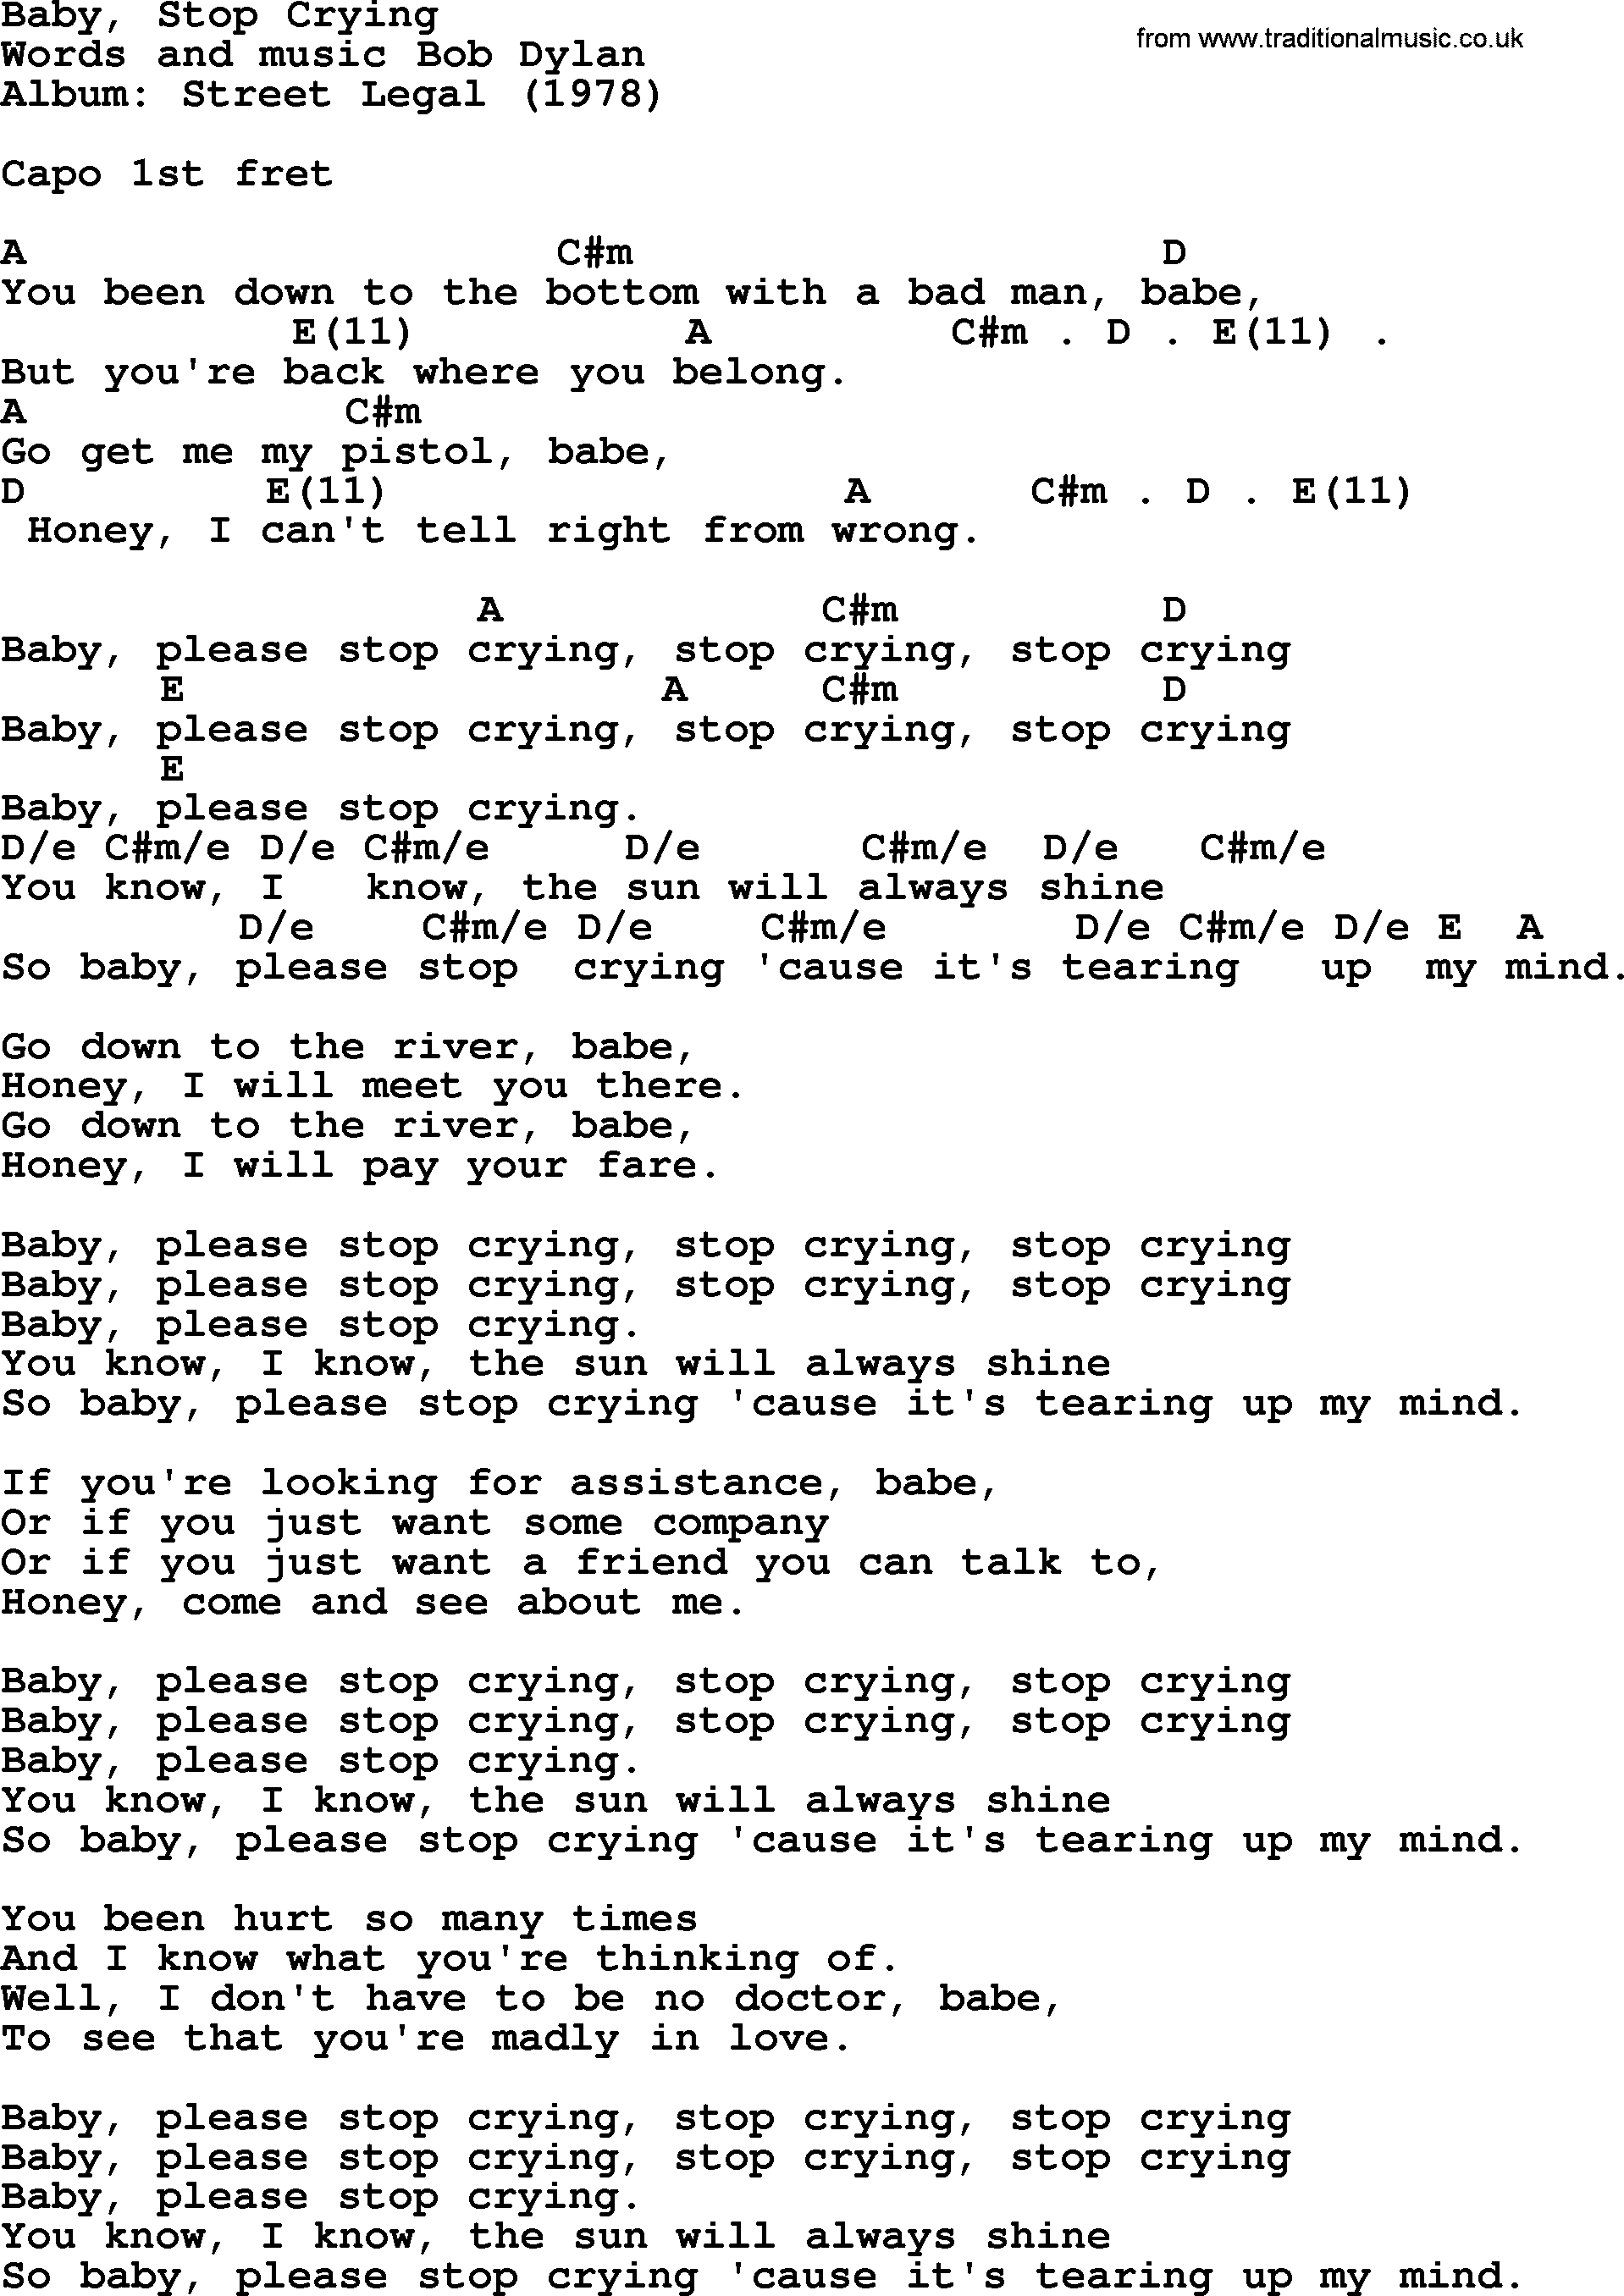 Bob Dylan song, lyrics with chords - Baby, Stop Crying